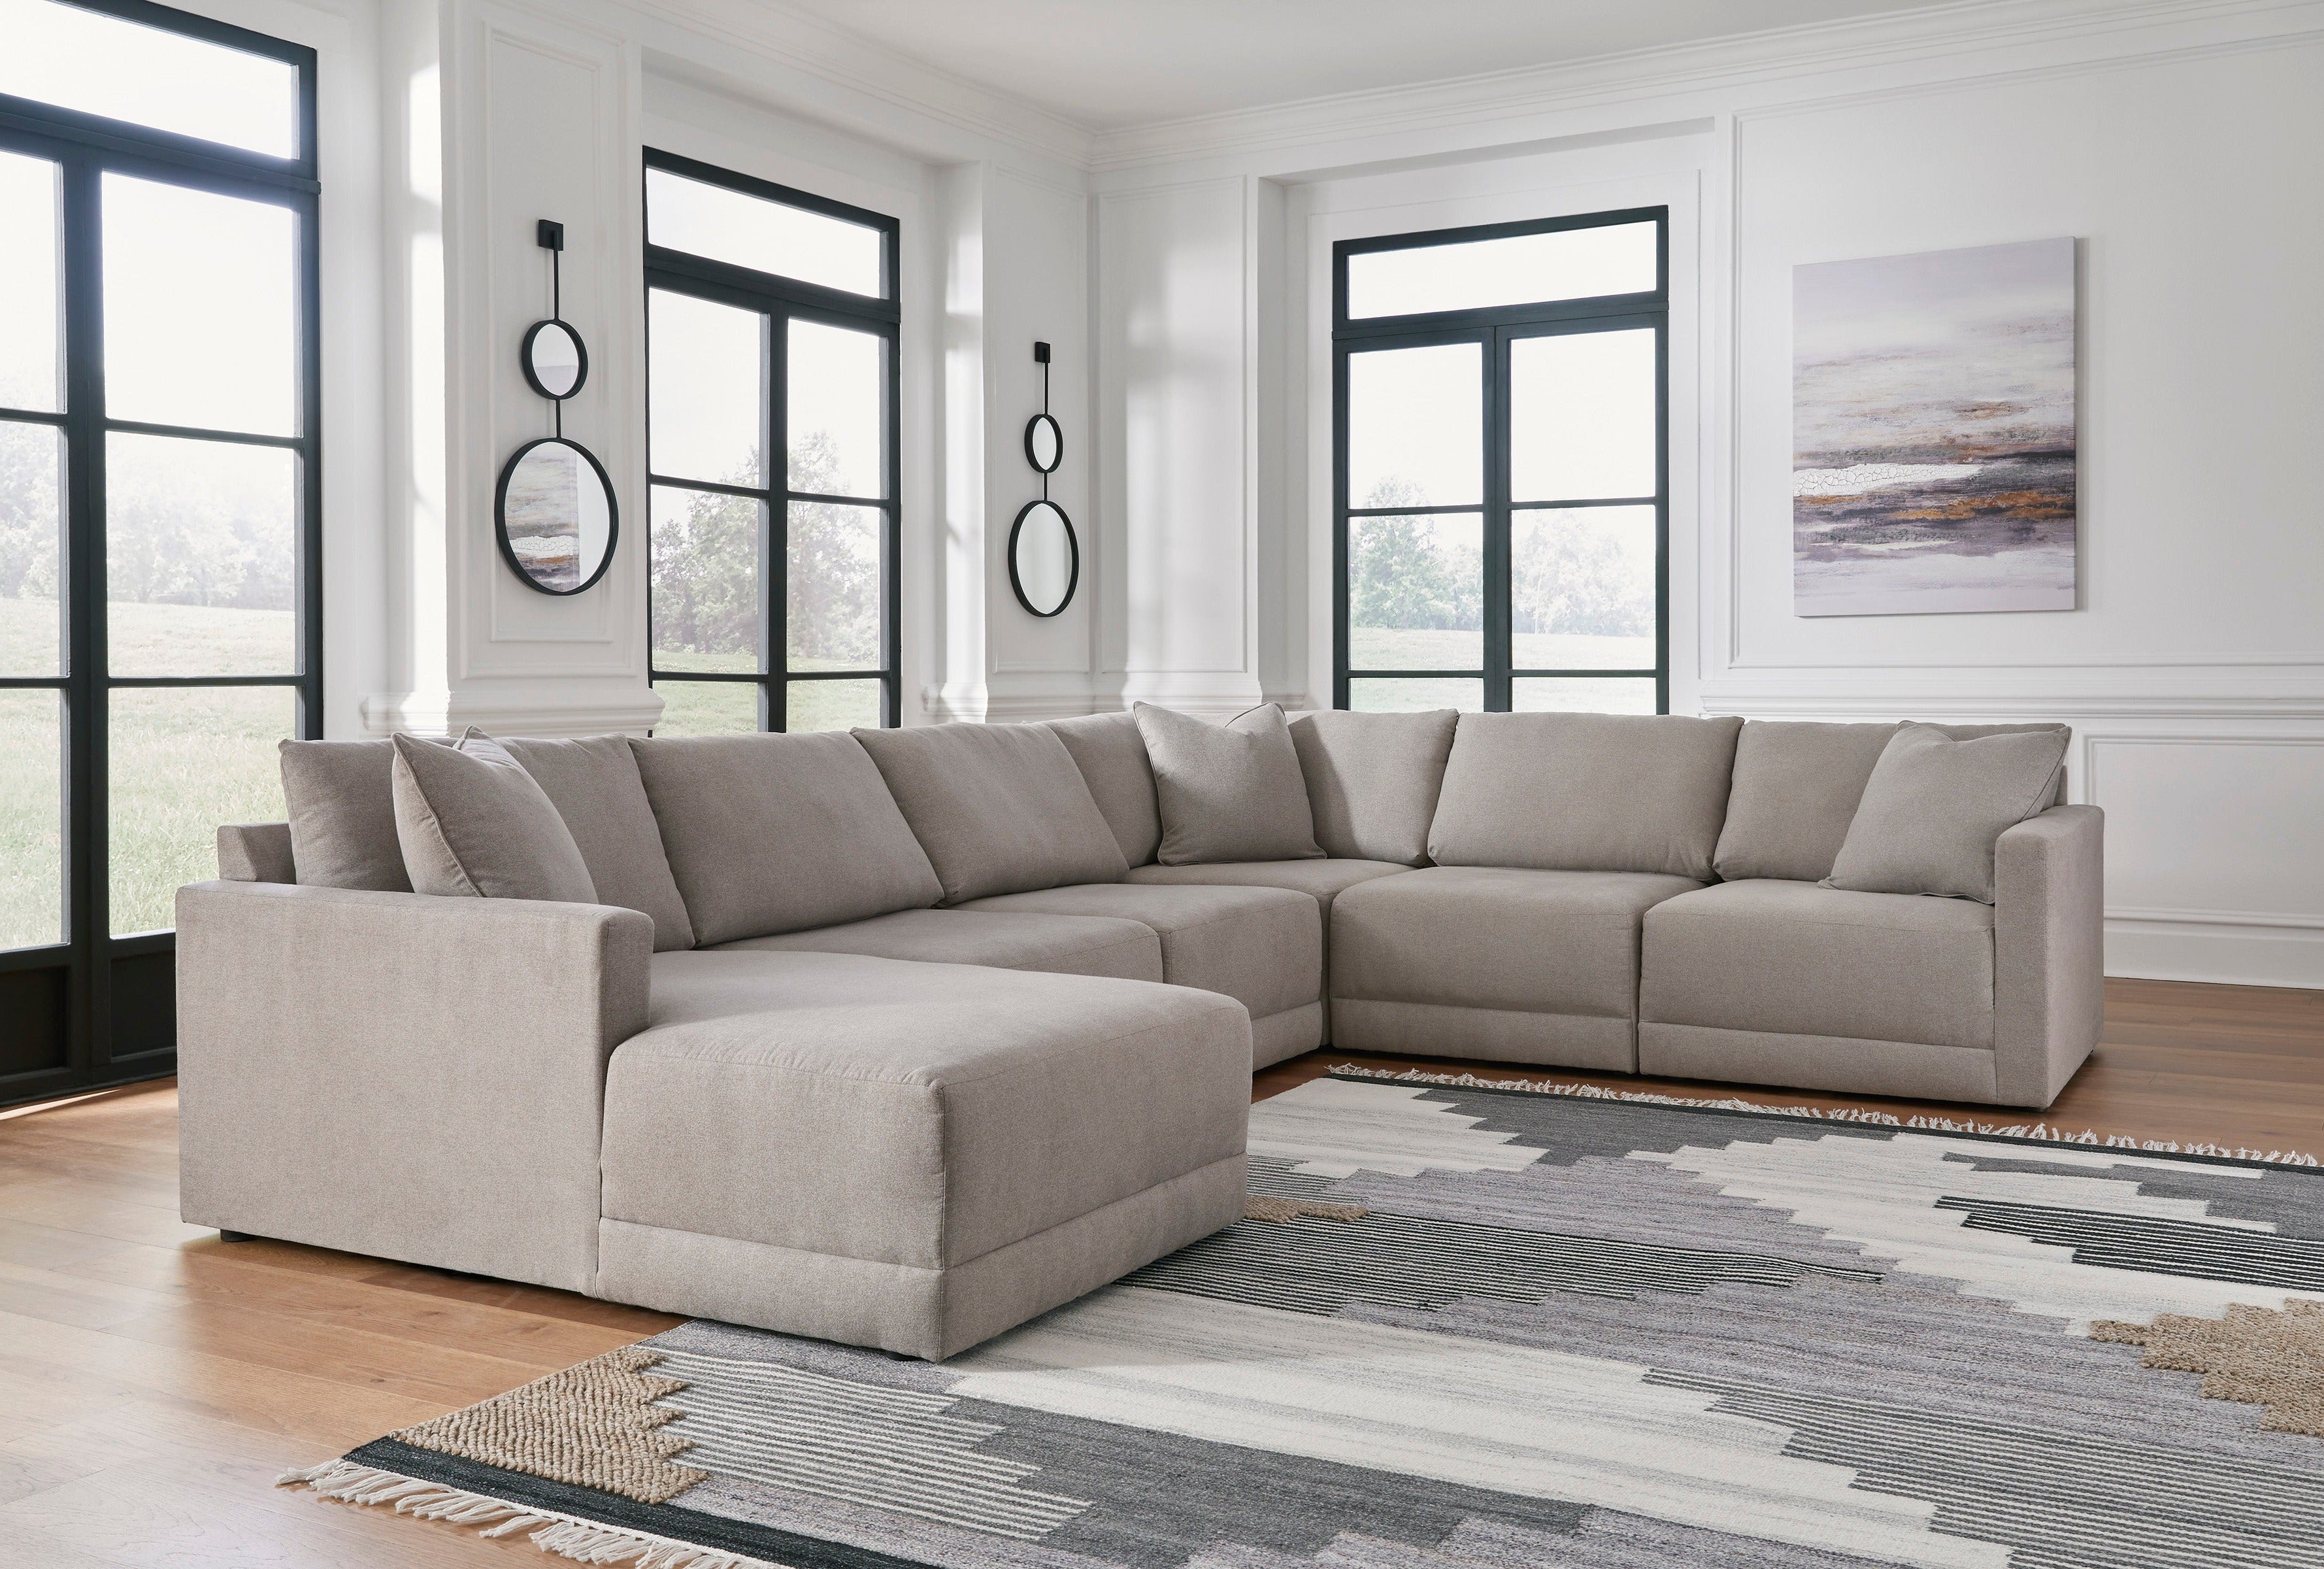 Katany Shadow 6-Piece LAF Chaise Sectional - SET | 2220116 | 2220165 | 2220177 | 2220146 | 2220146 | 2220146 - Bien Home Furniture &amp; Electronics